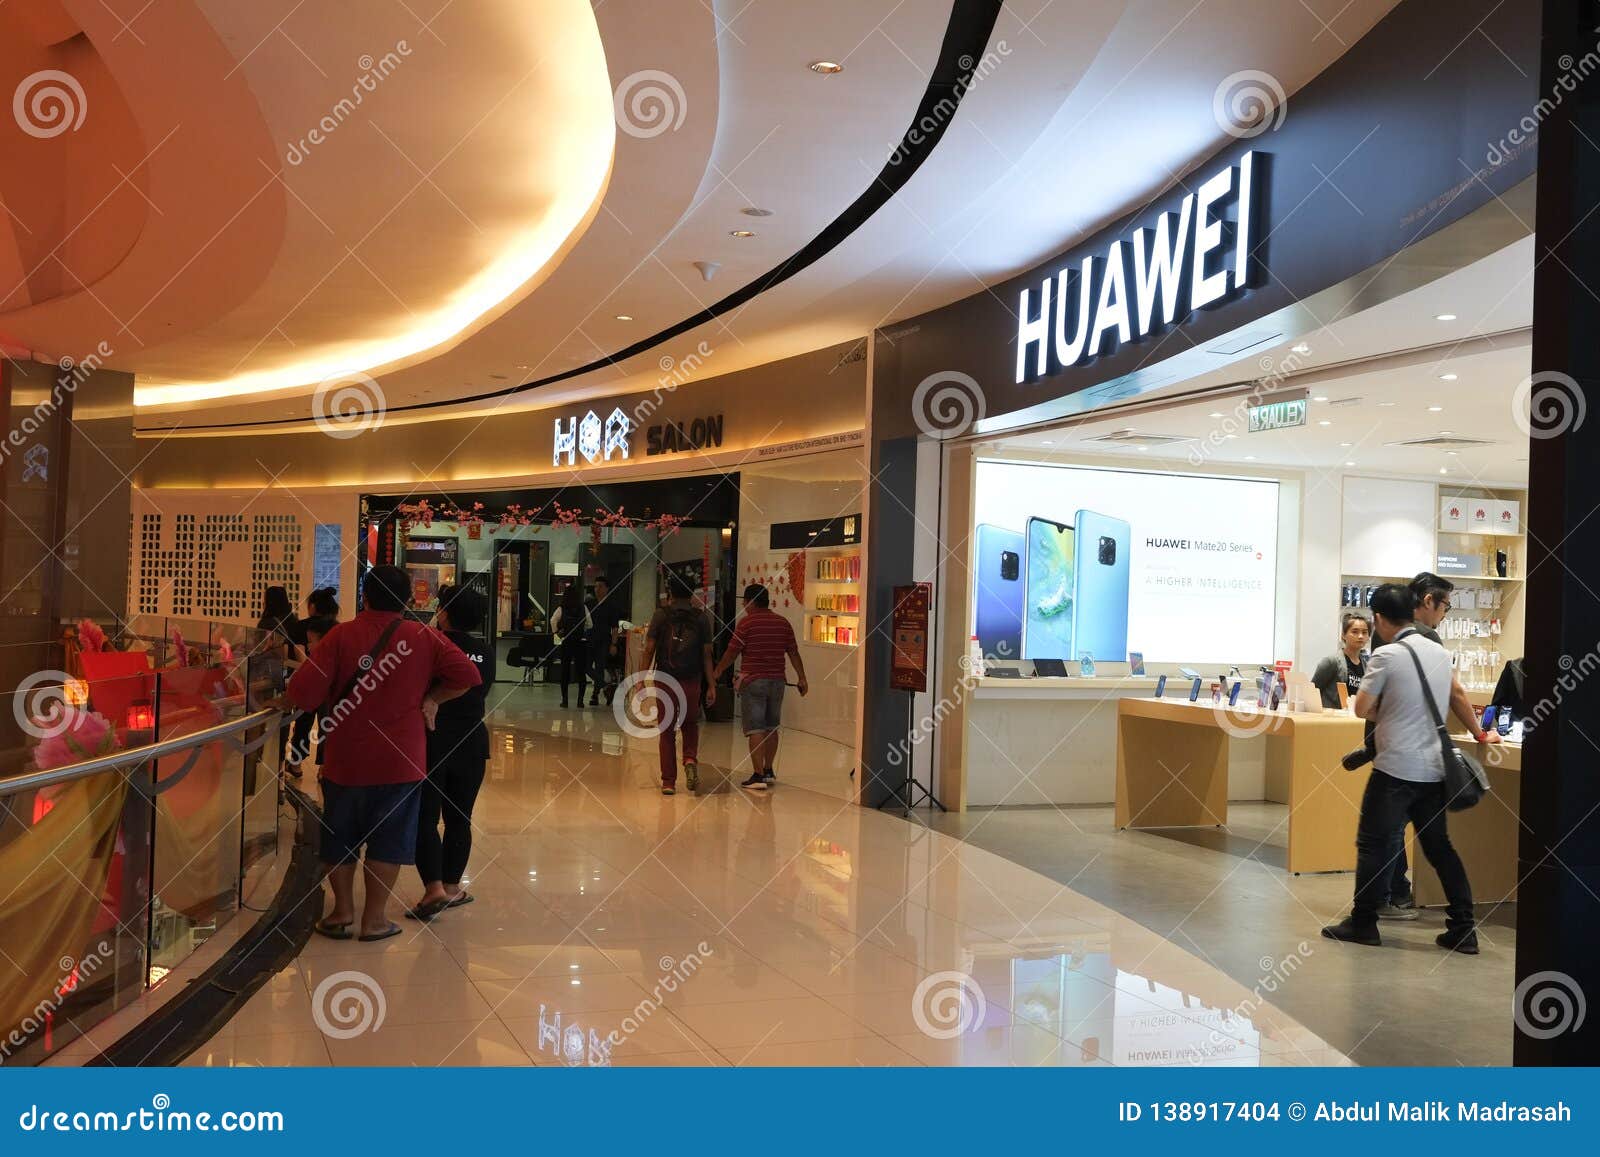 Huawei Outlet In Malaysia - alsalaman